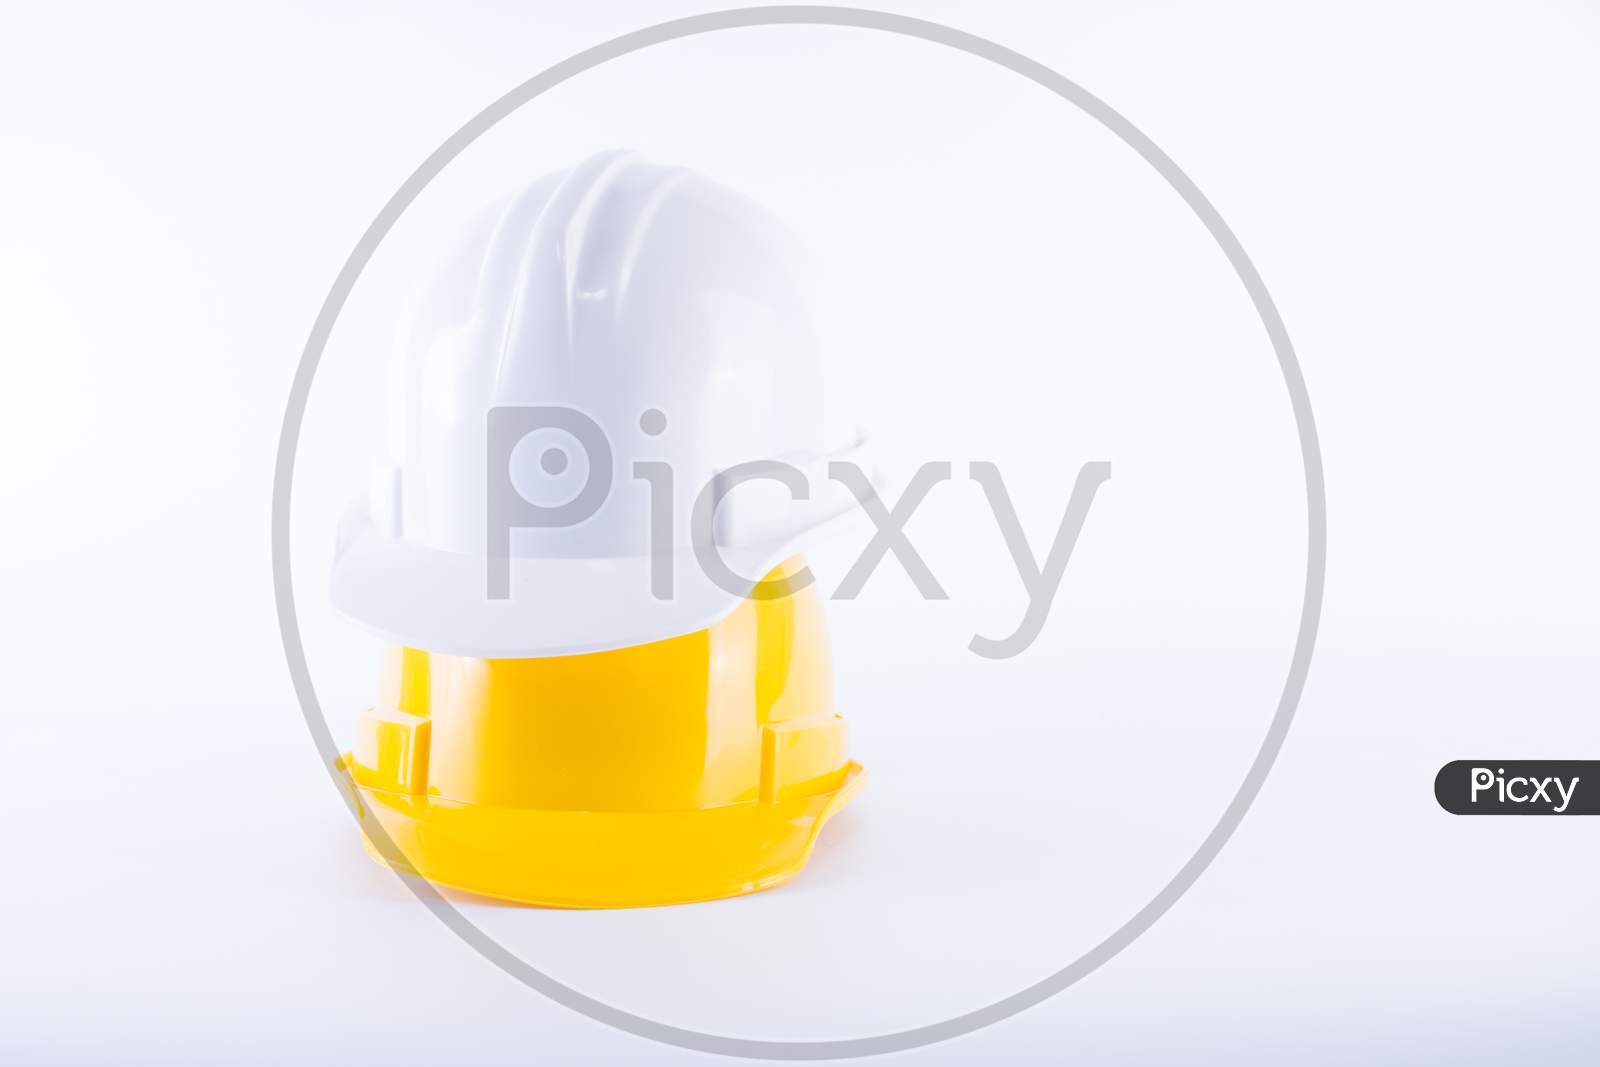 White And Yellow Safety Helmet On White Background. Hard Hat And Thick Gloves On White Isolated Background. Safety Equipment Concept. Worker And Industrial Theme.